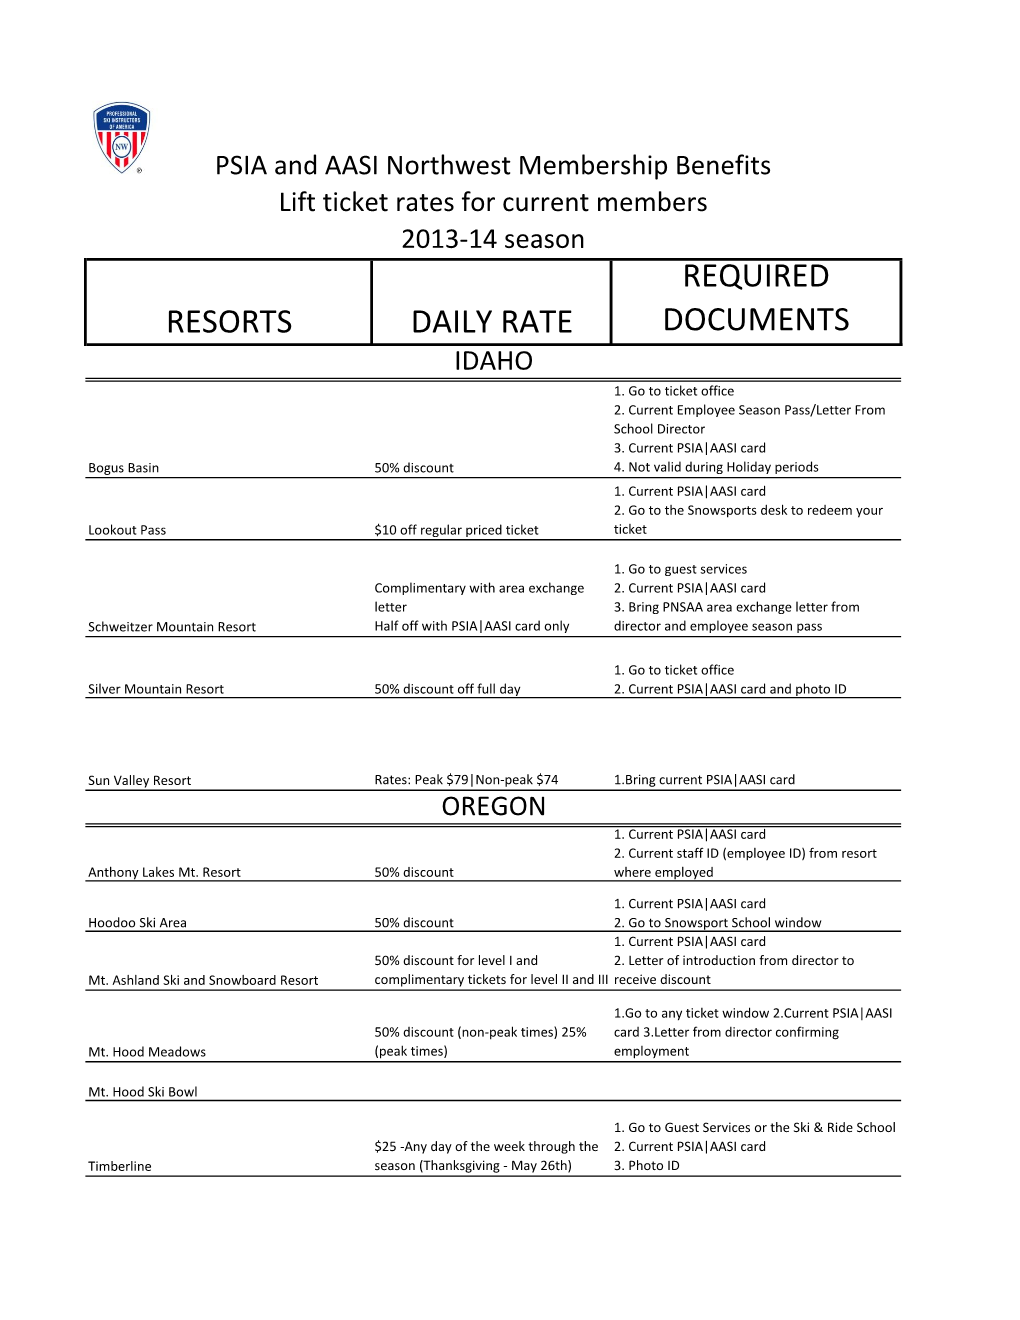 Resorts Daily Rate Required Documents